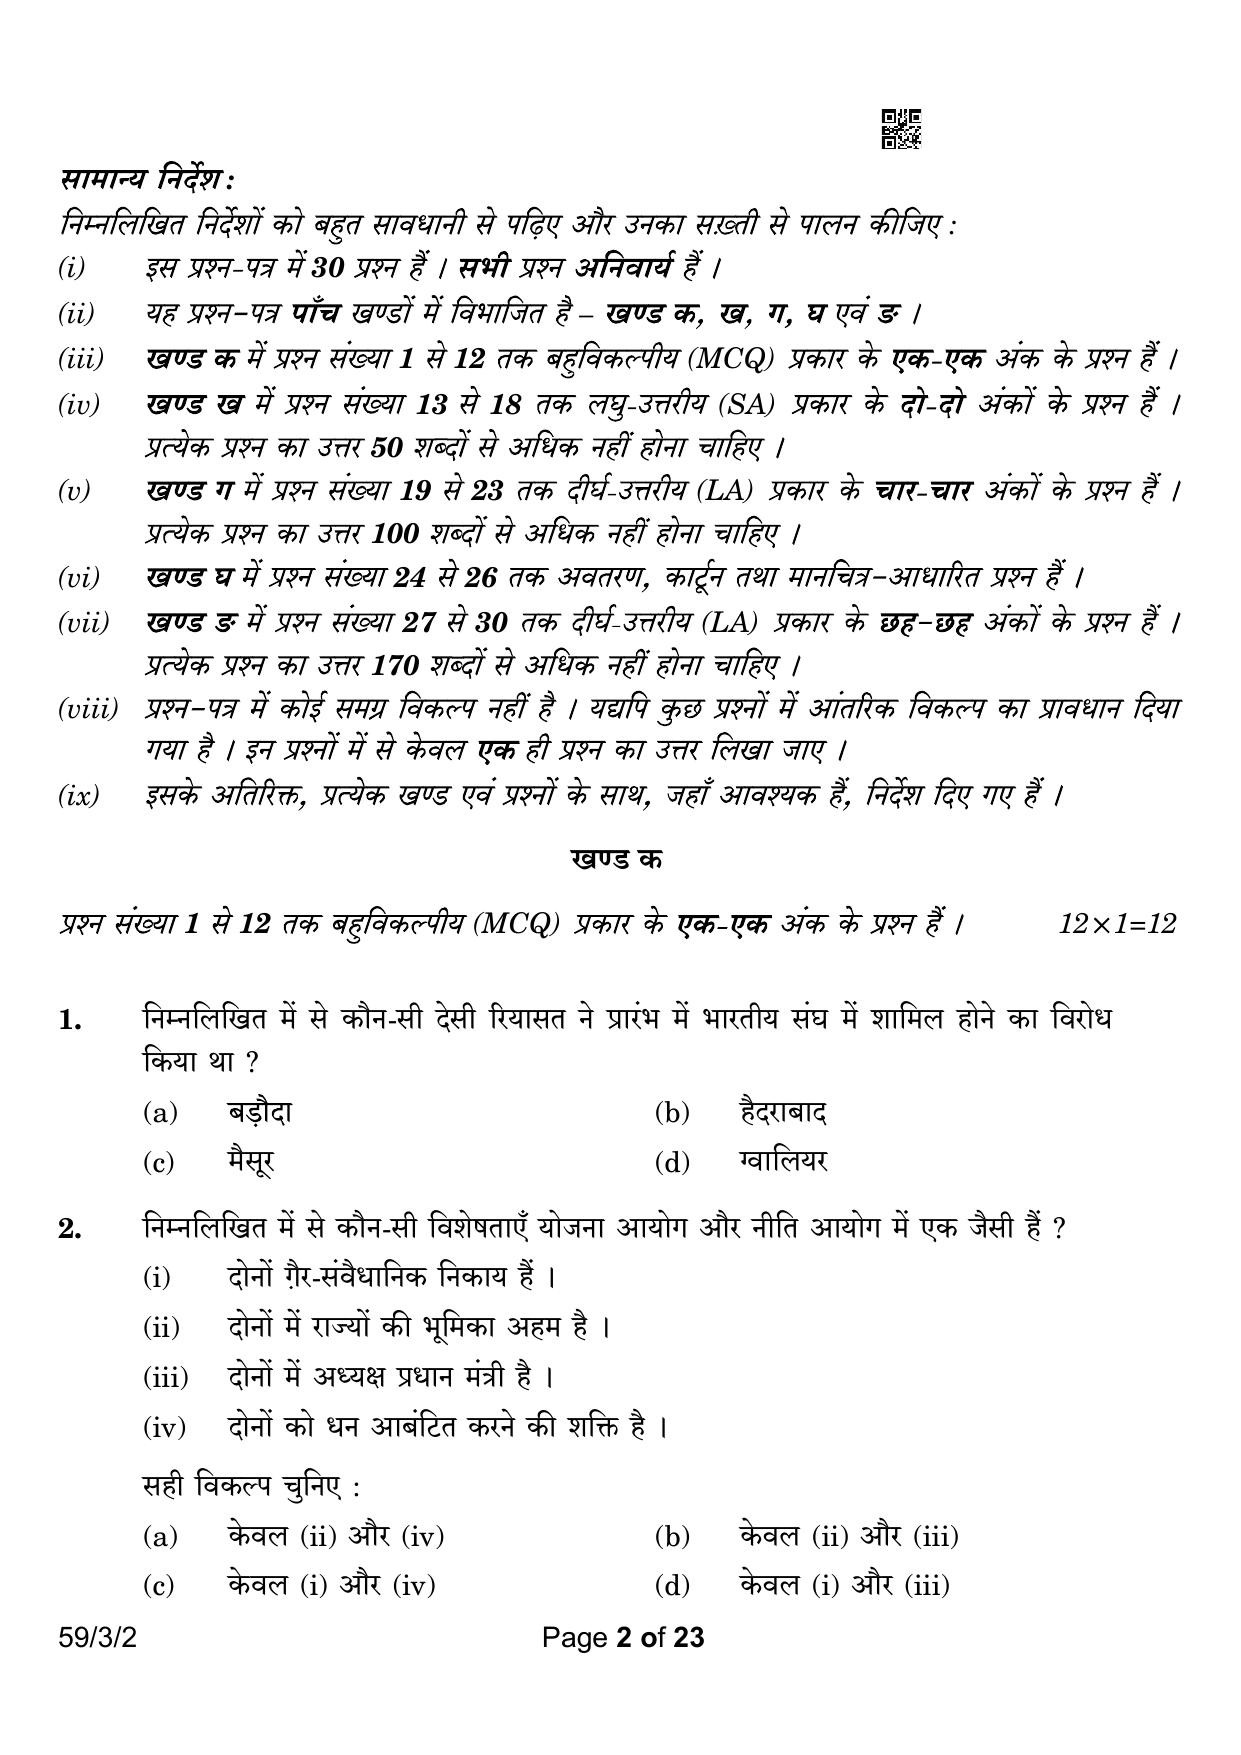 CBSE Class 12 59-3-2 Political Science 2023 Question Paper - Page 2